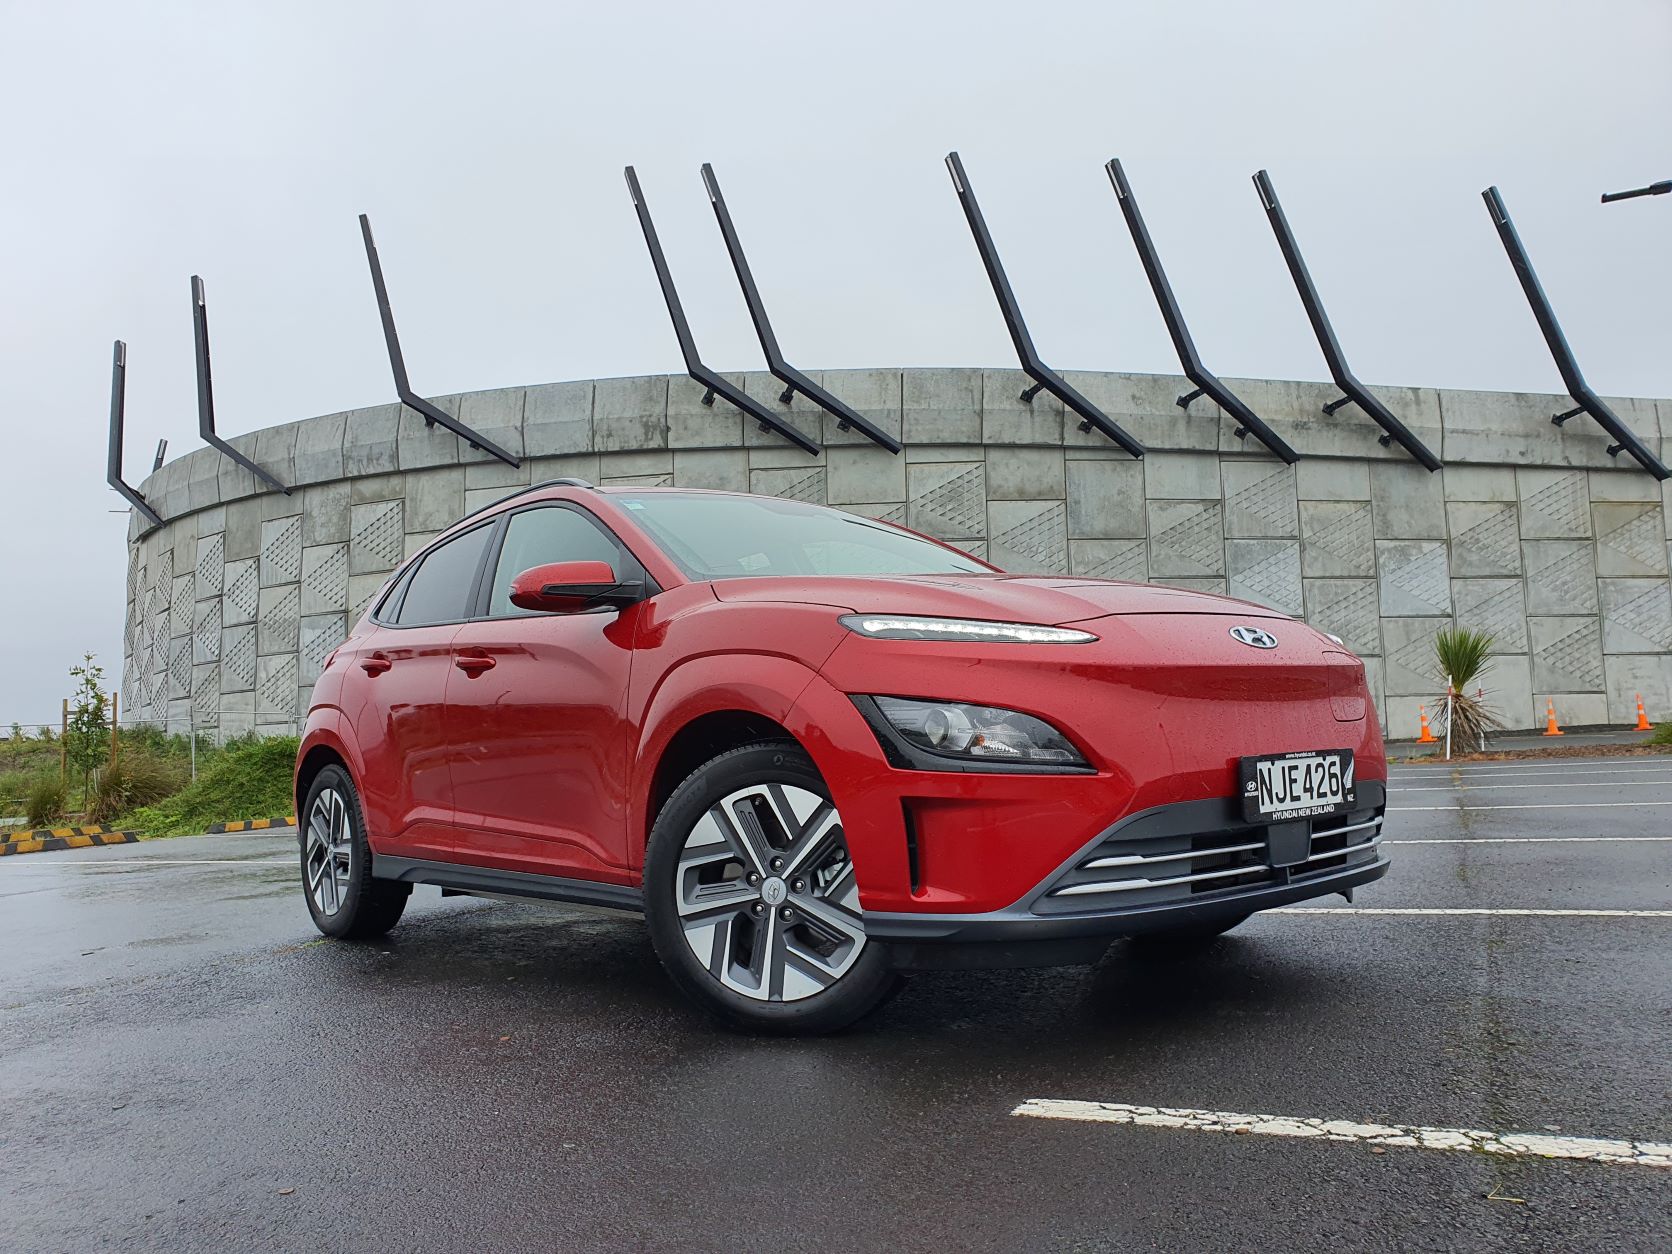 Front view of the Hyundai Kona Electric Series 2